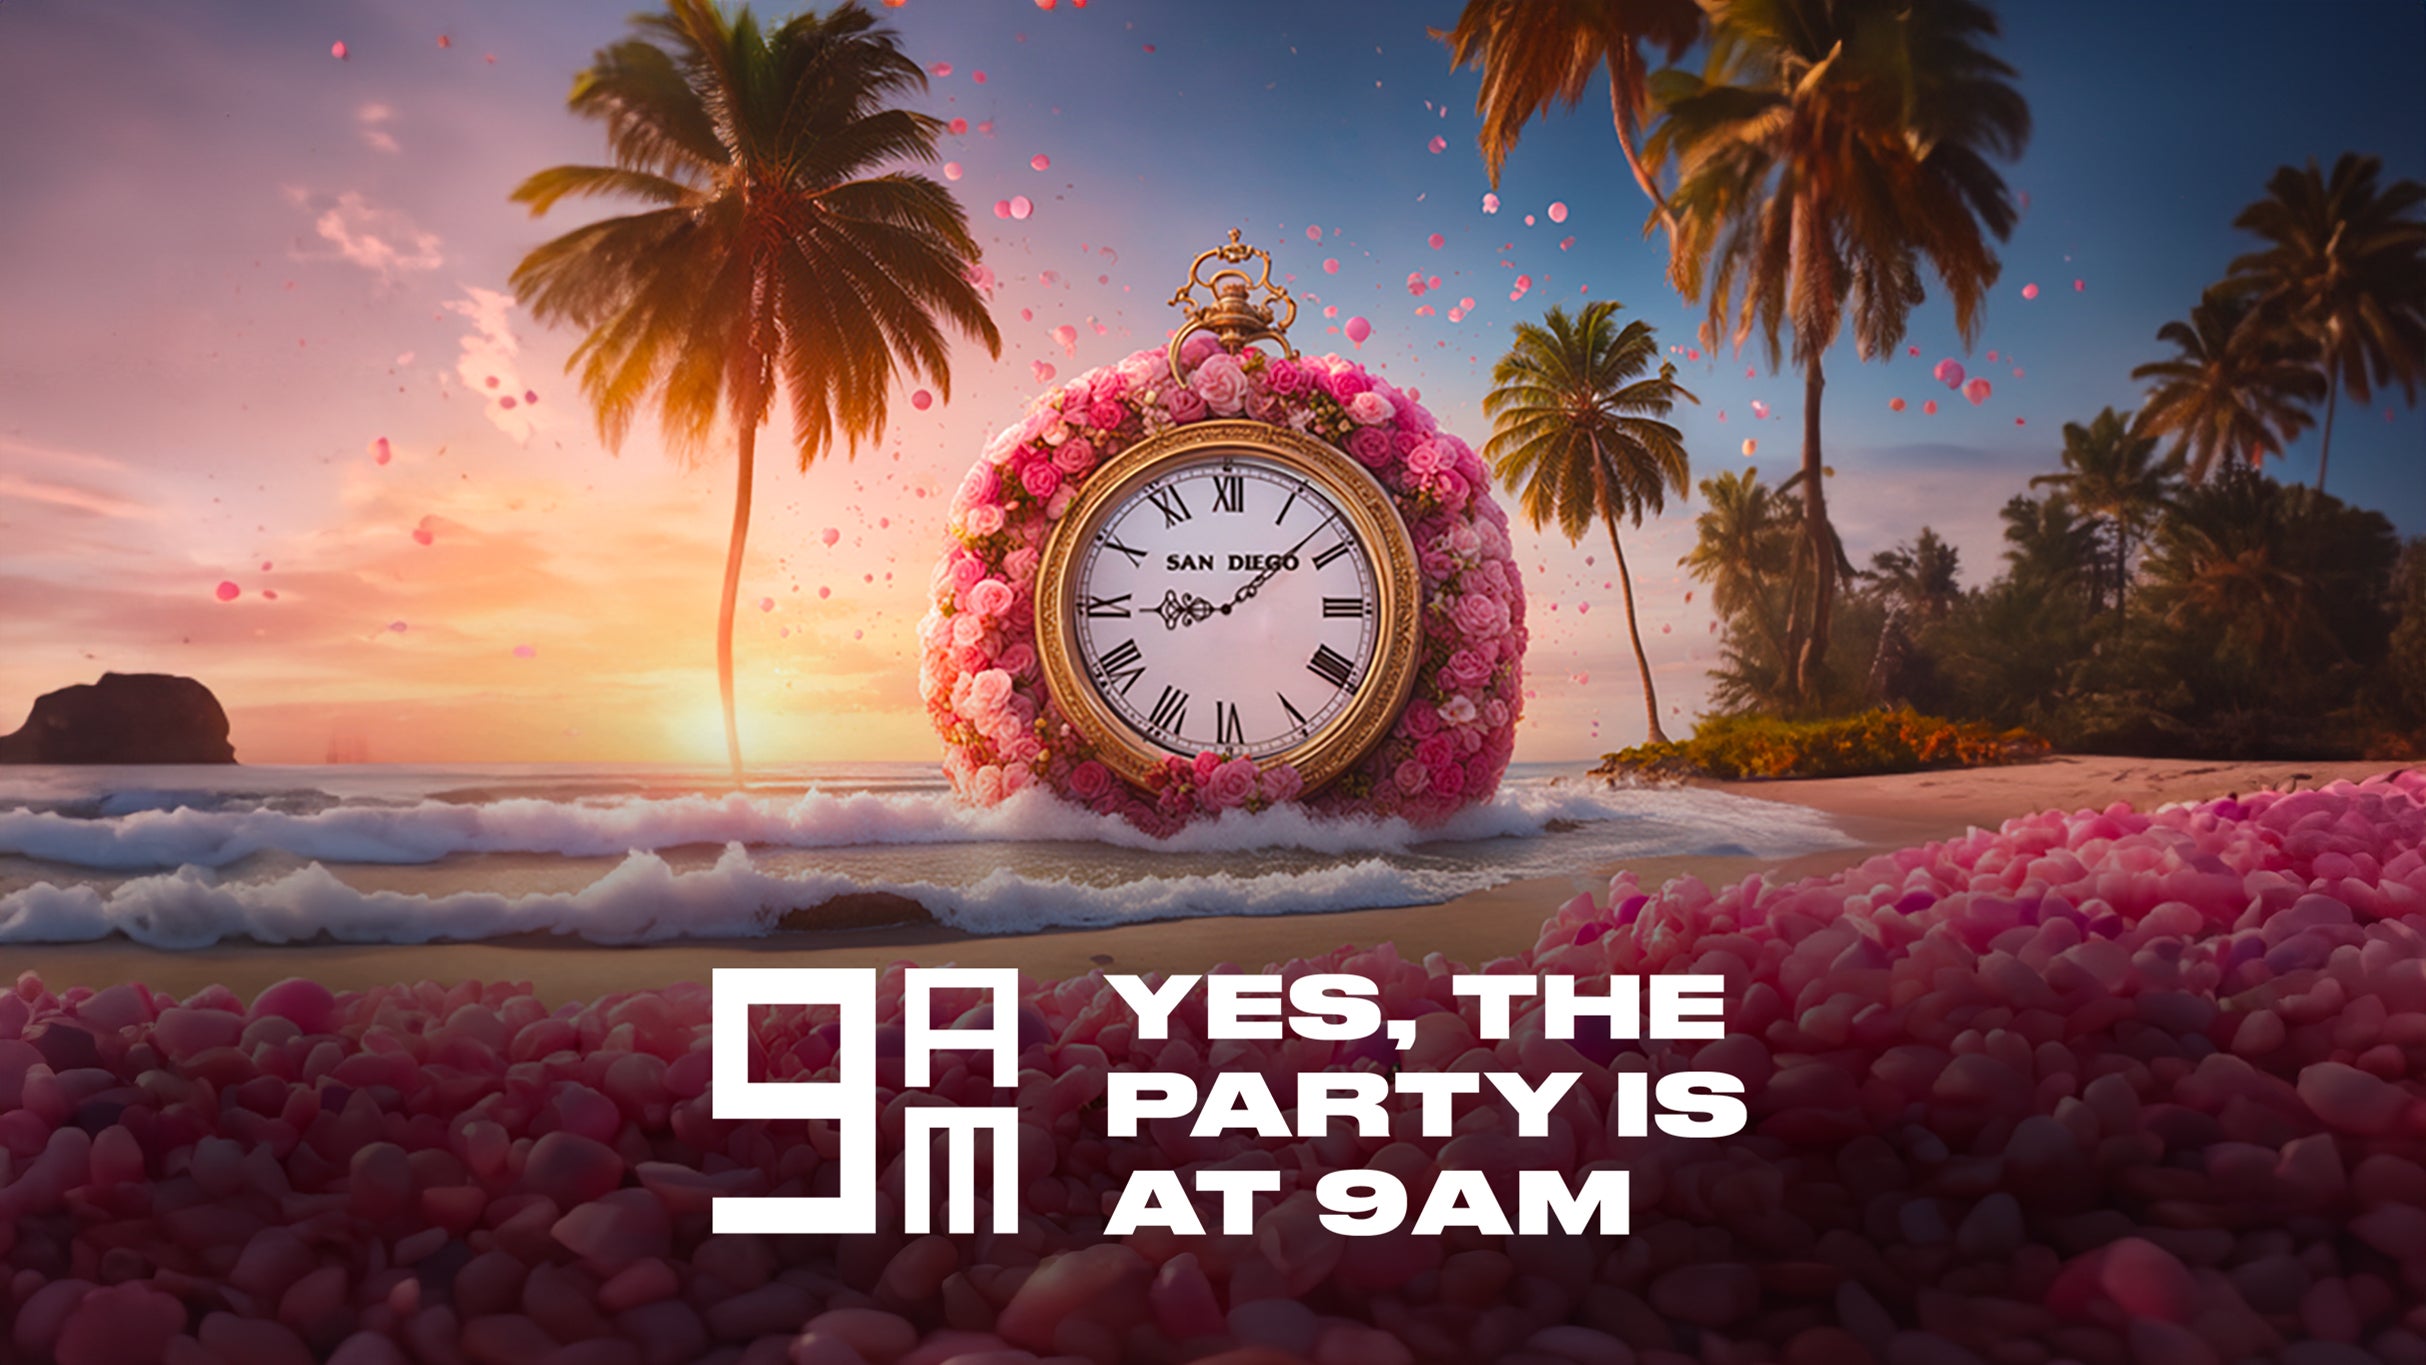 The 9am Banger: Rise & Rosé ...yes, It Starts At 9am in New York promo photo for The Rooftop at Pier 17 presale offer code